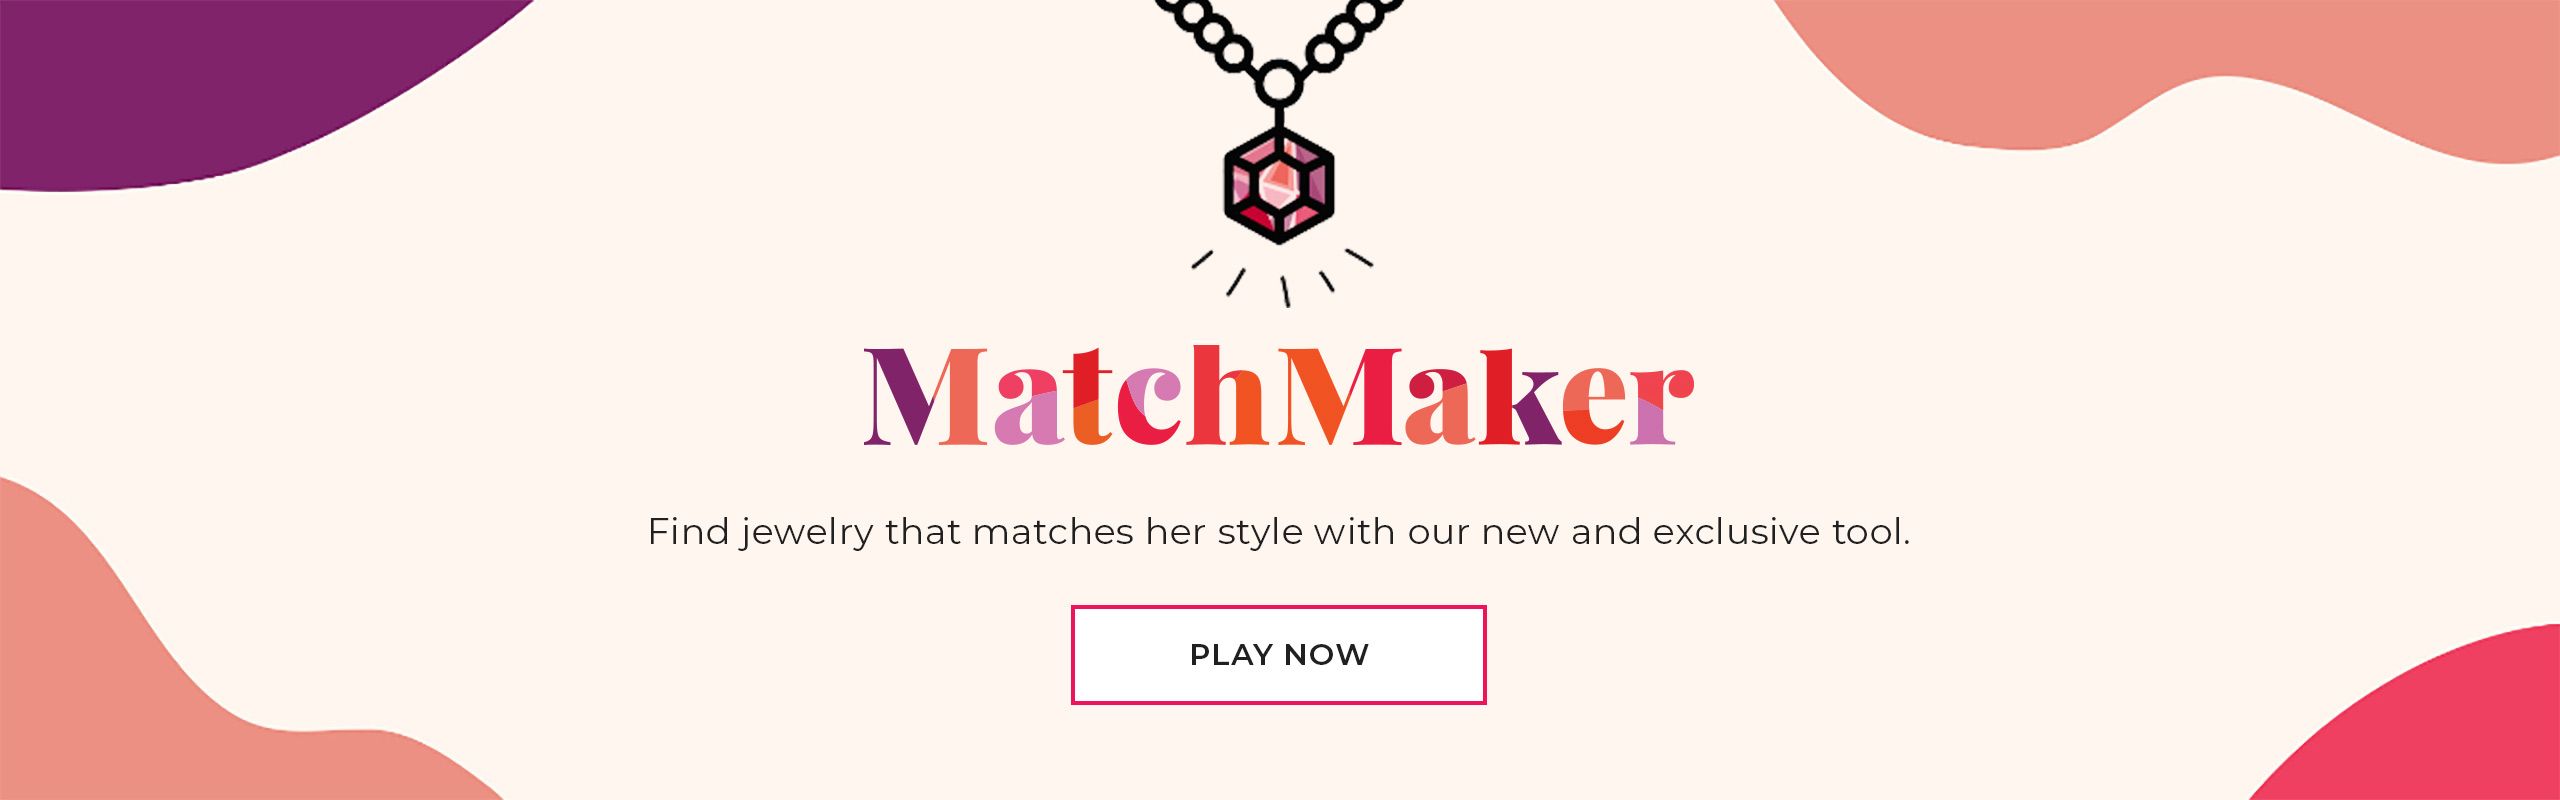 Banner for Match Maker by Shane Co